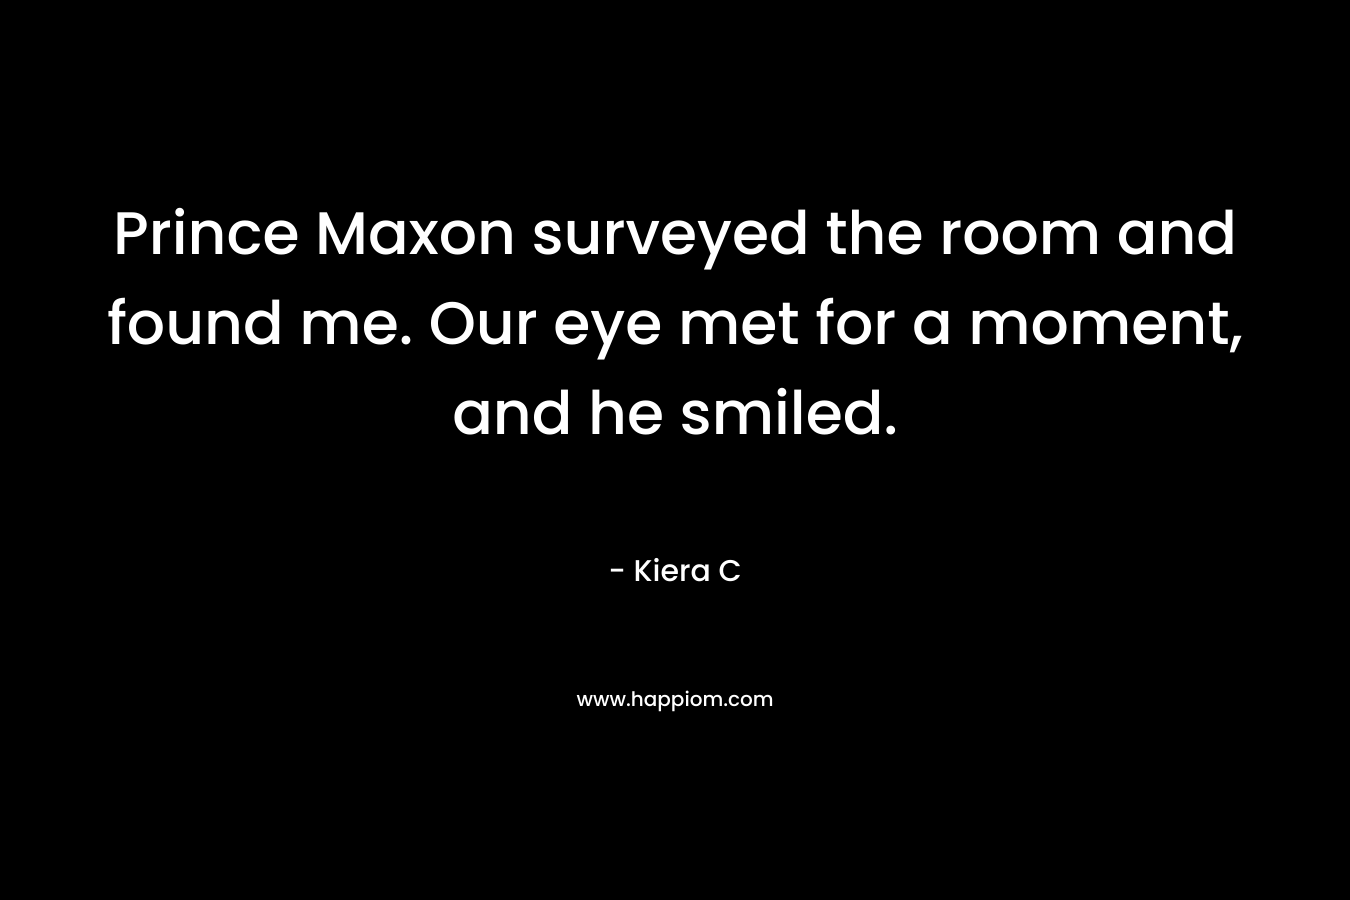 Prince Maxon surveyed the room and found me. Our eye met for a moment, and he smiled.